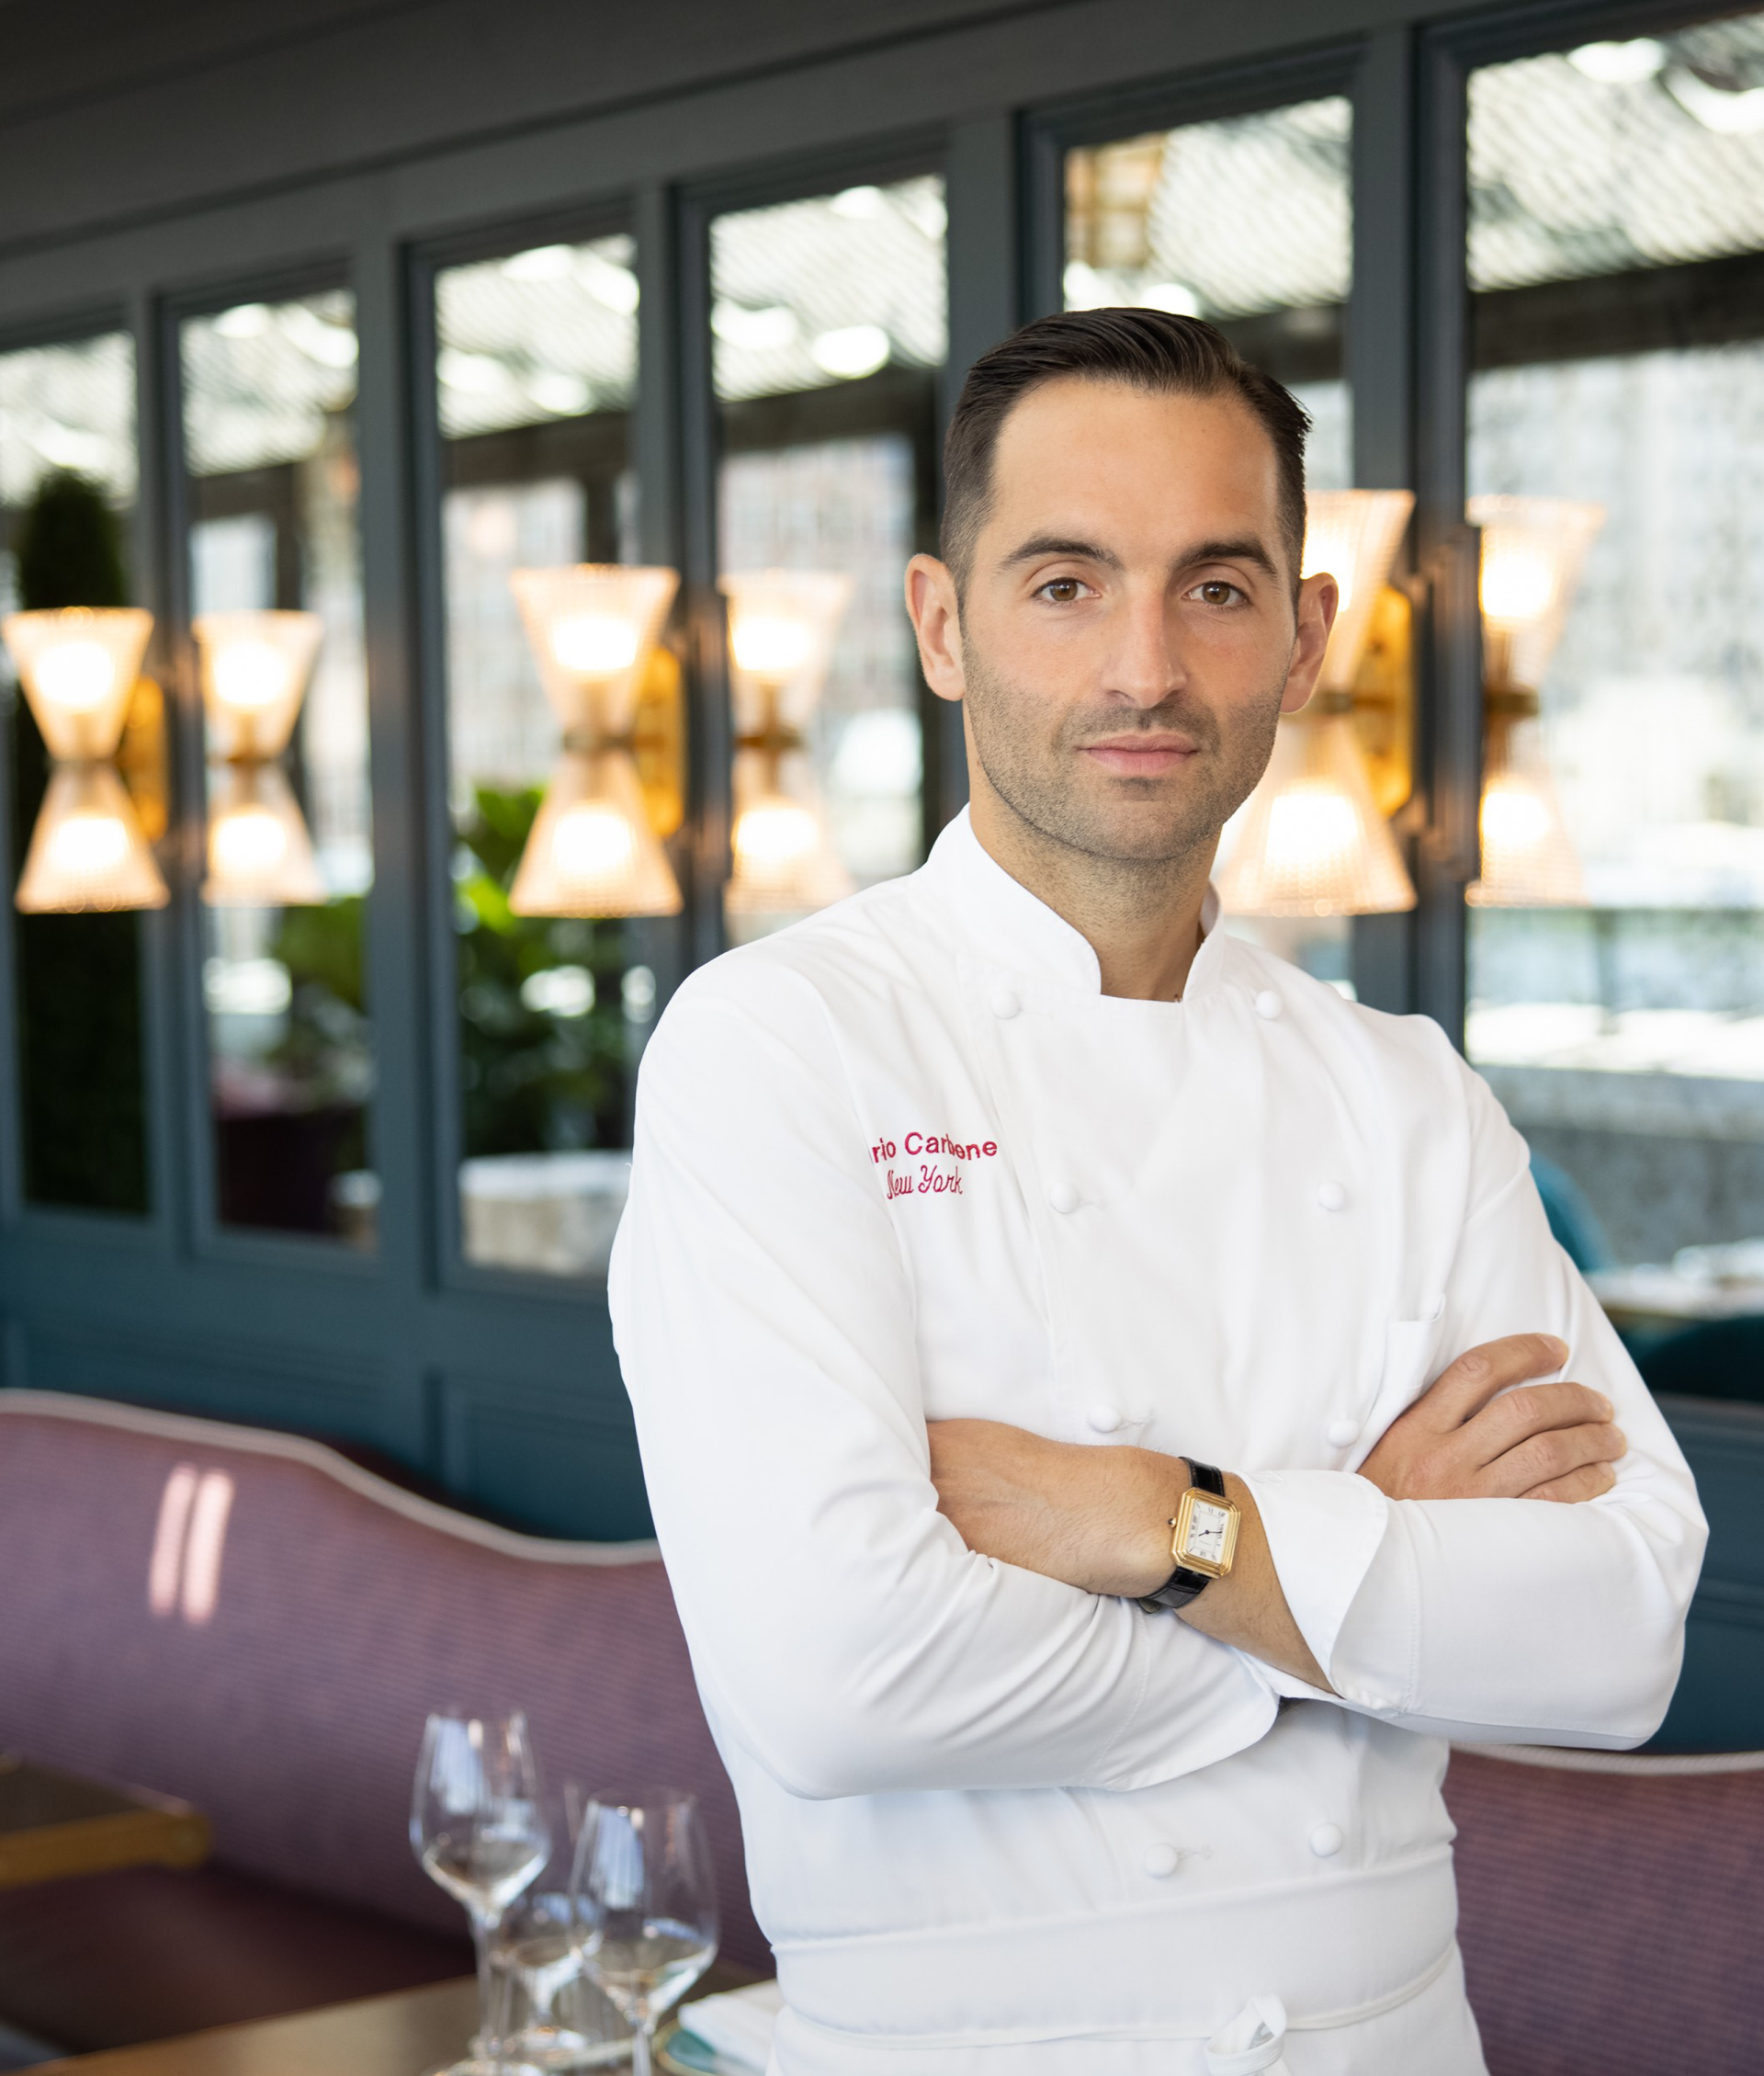 Meet Mario Carbone, Chef-restaurateur, Co-founder of Major Food Group